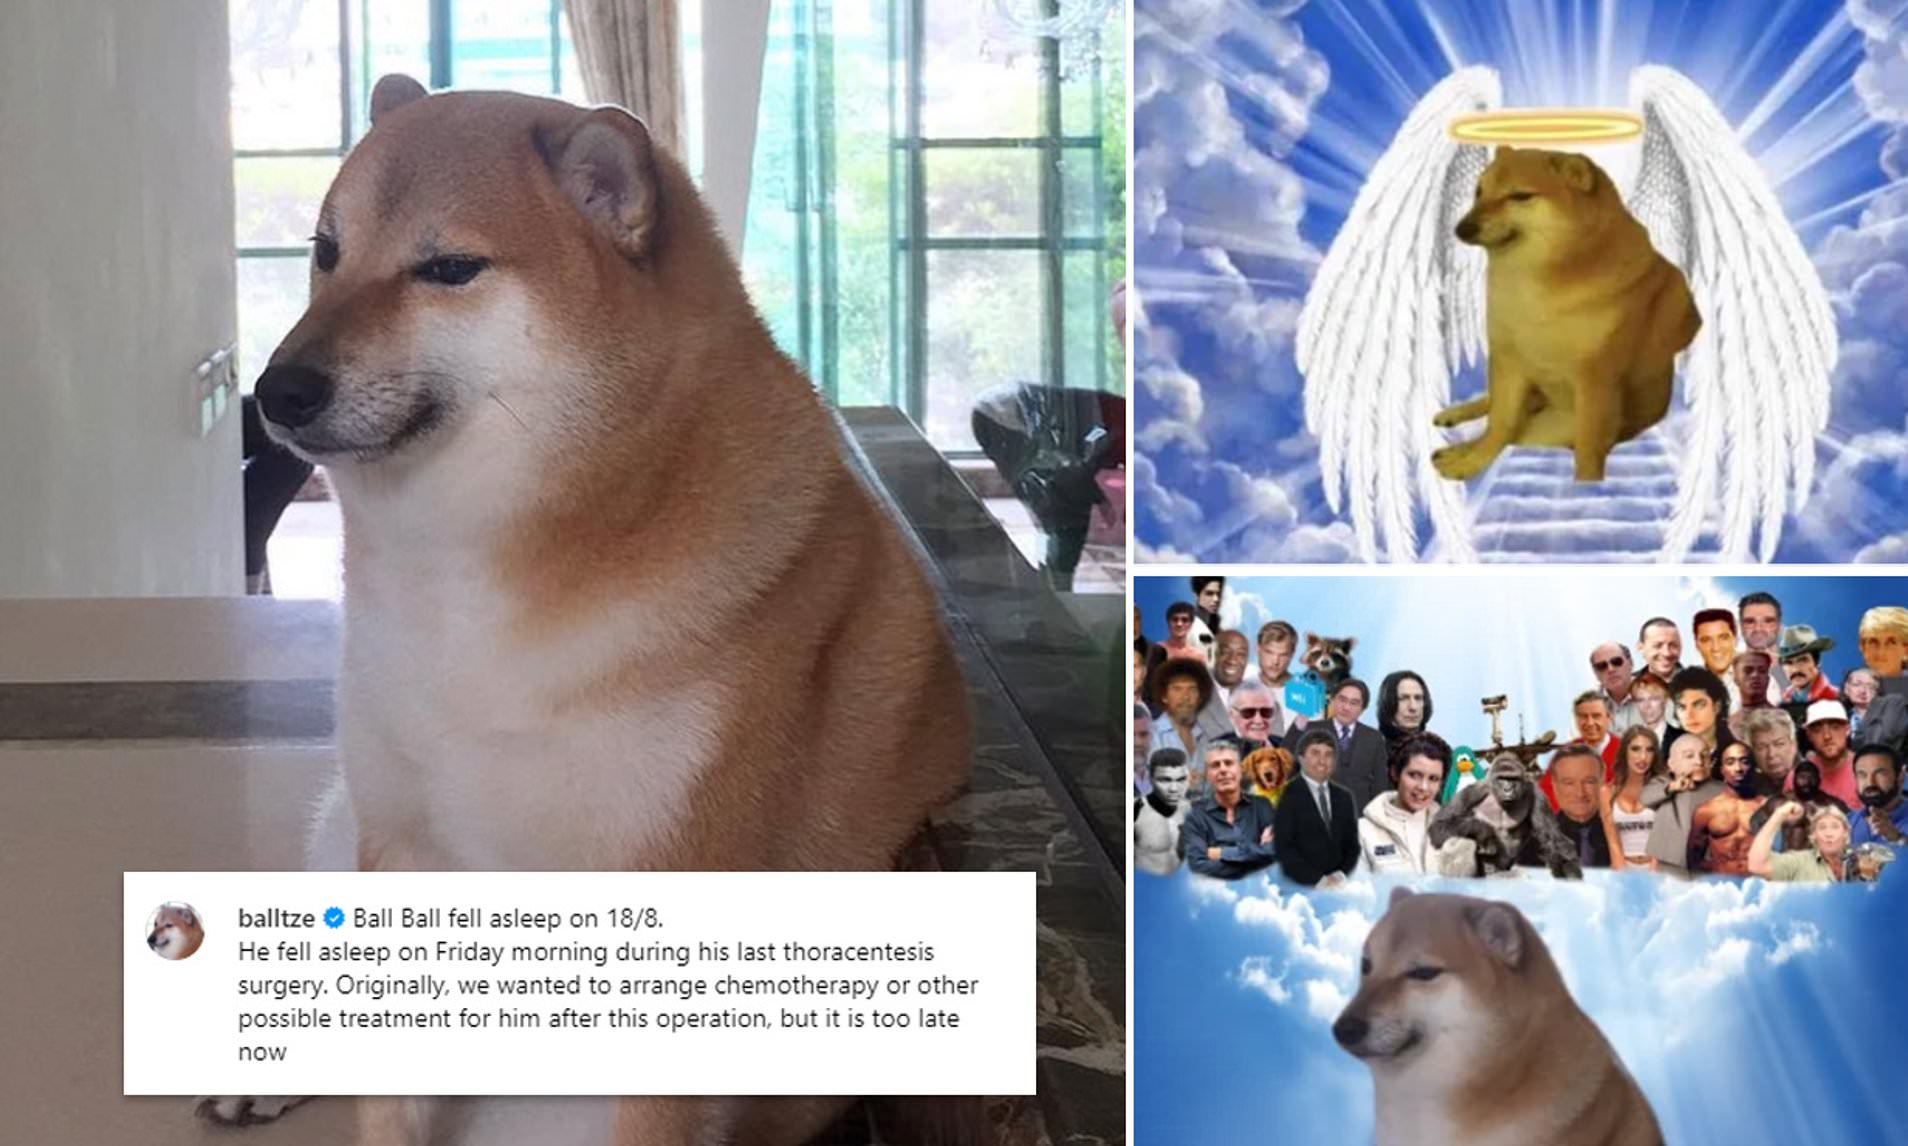 Dog that inspired ‘Doge’ meme has leukemia and liver disease, owner says | Dogs | The Guardian